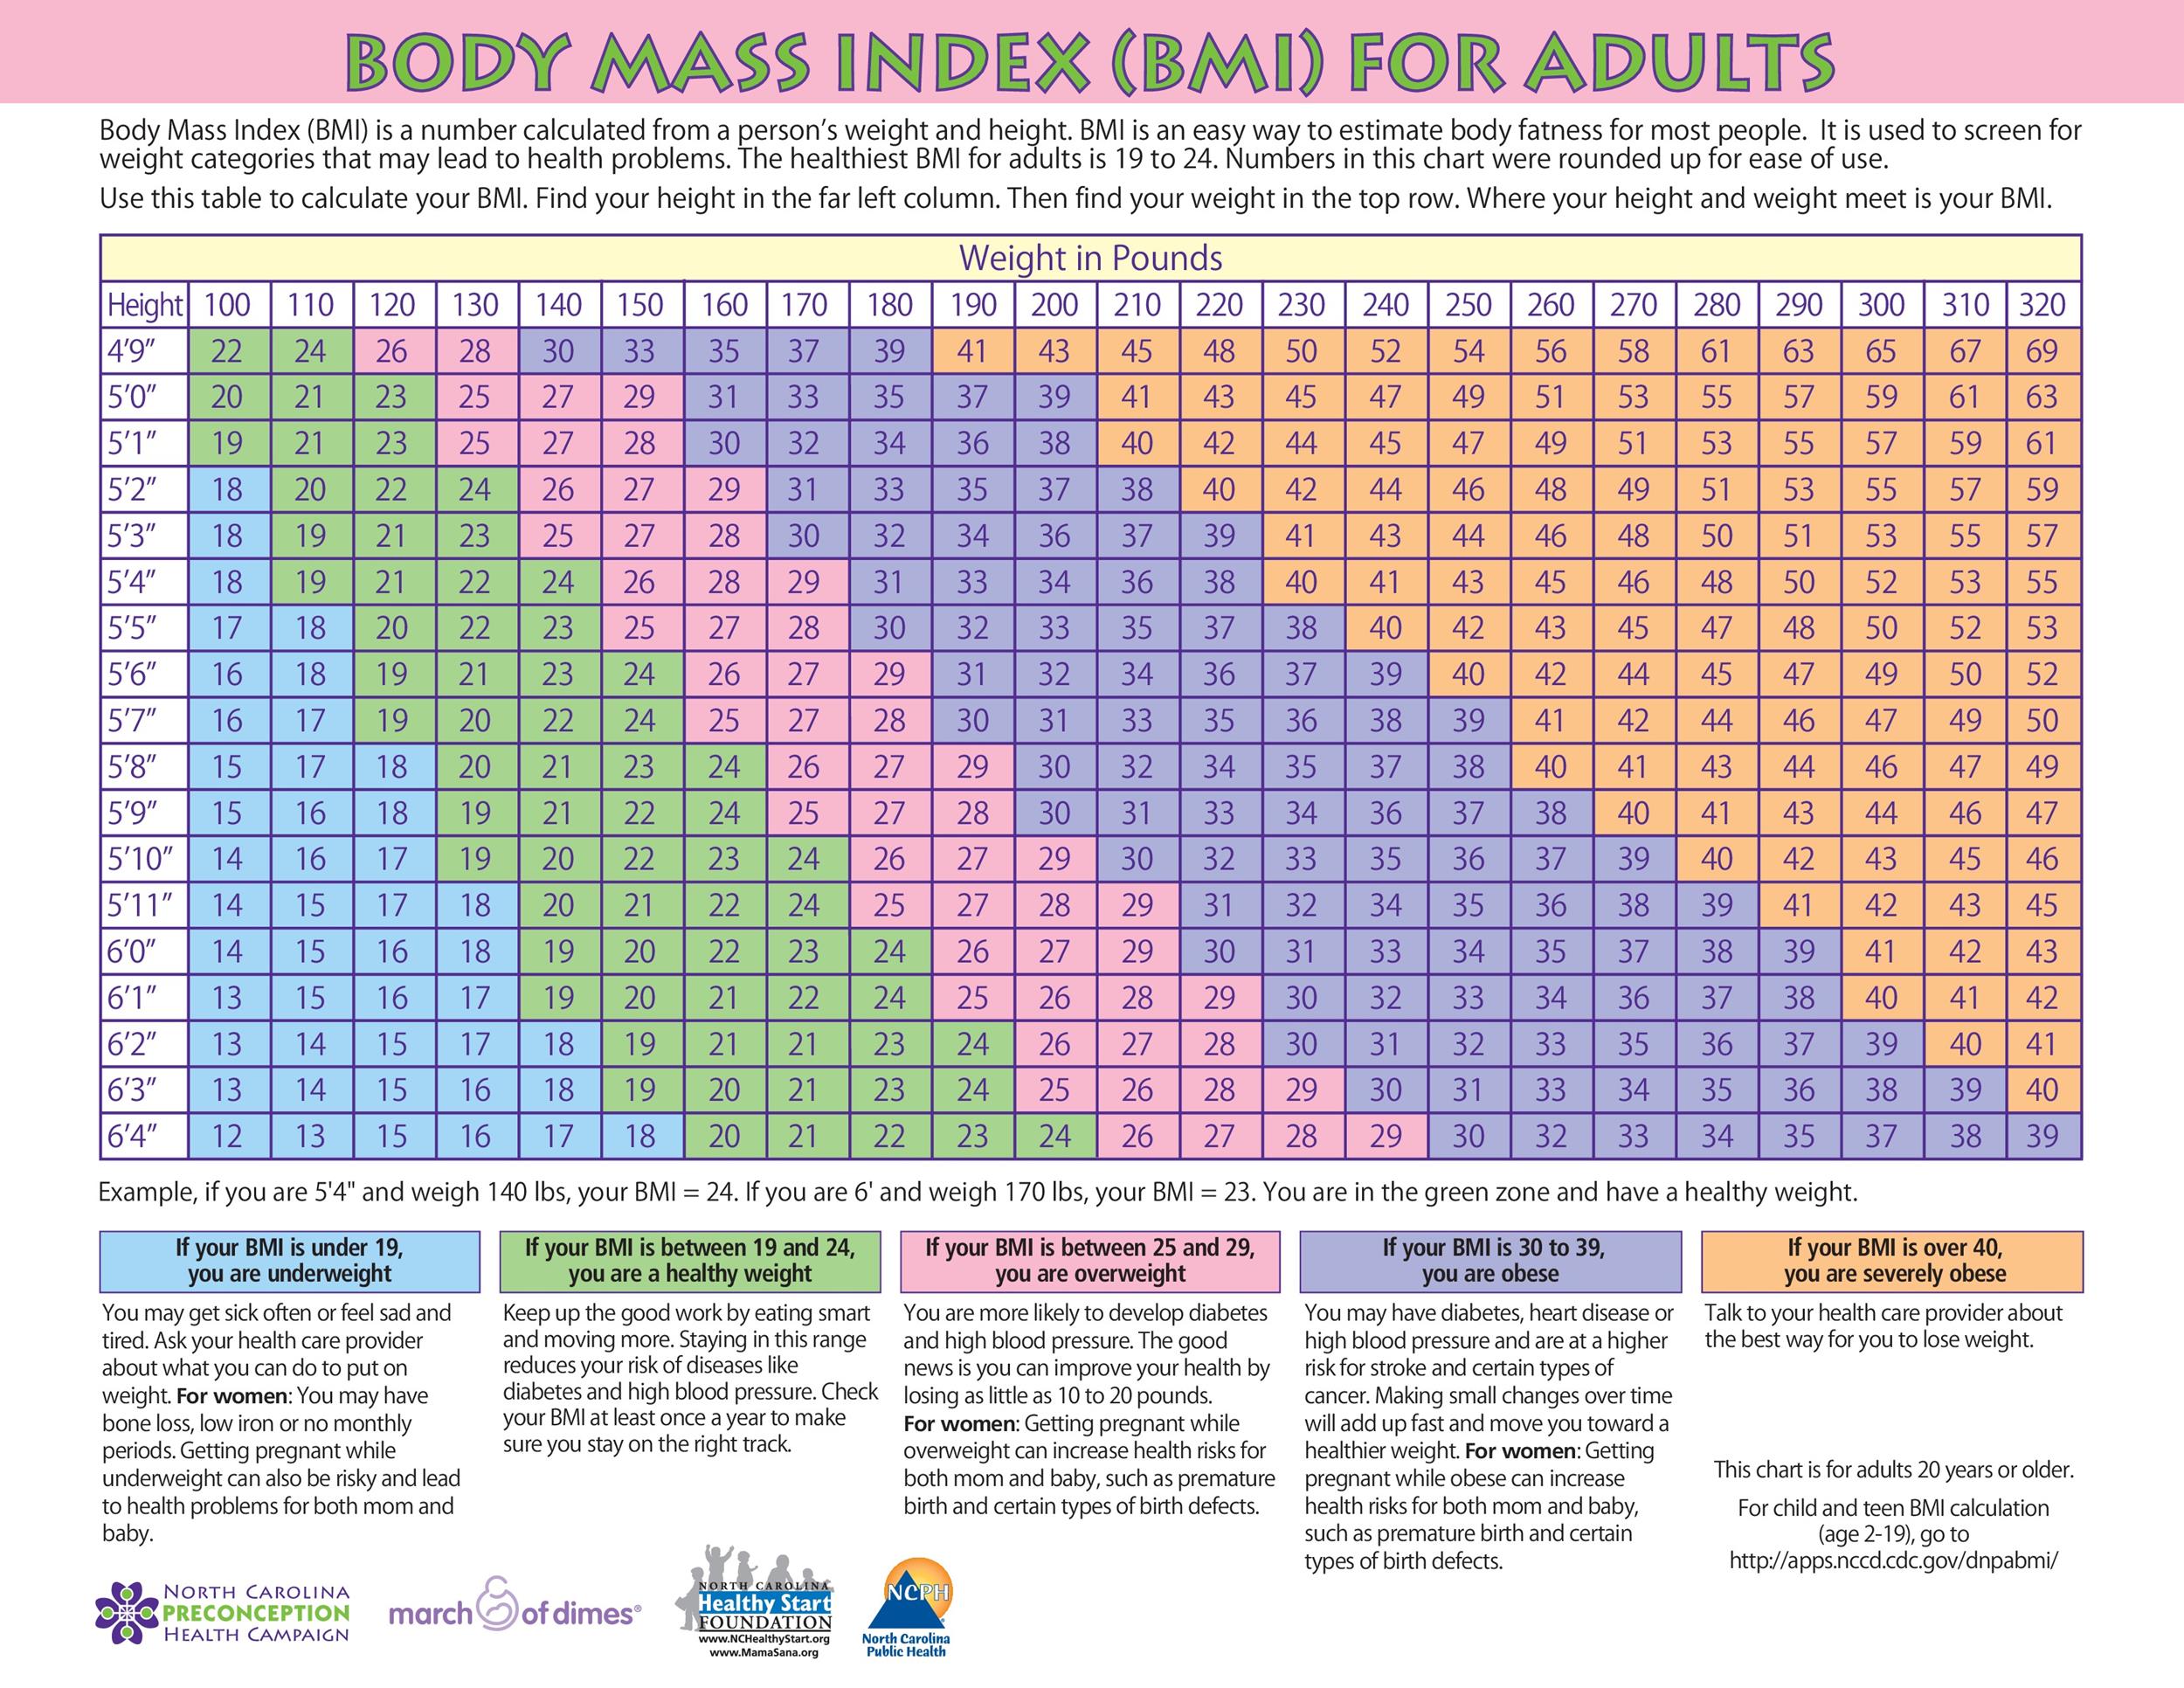 36 Free BMI Chart Templates (for Women, Men or Kids) ᐅ Template Lab